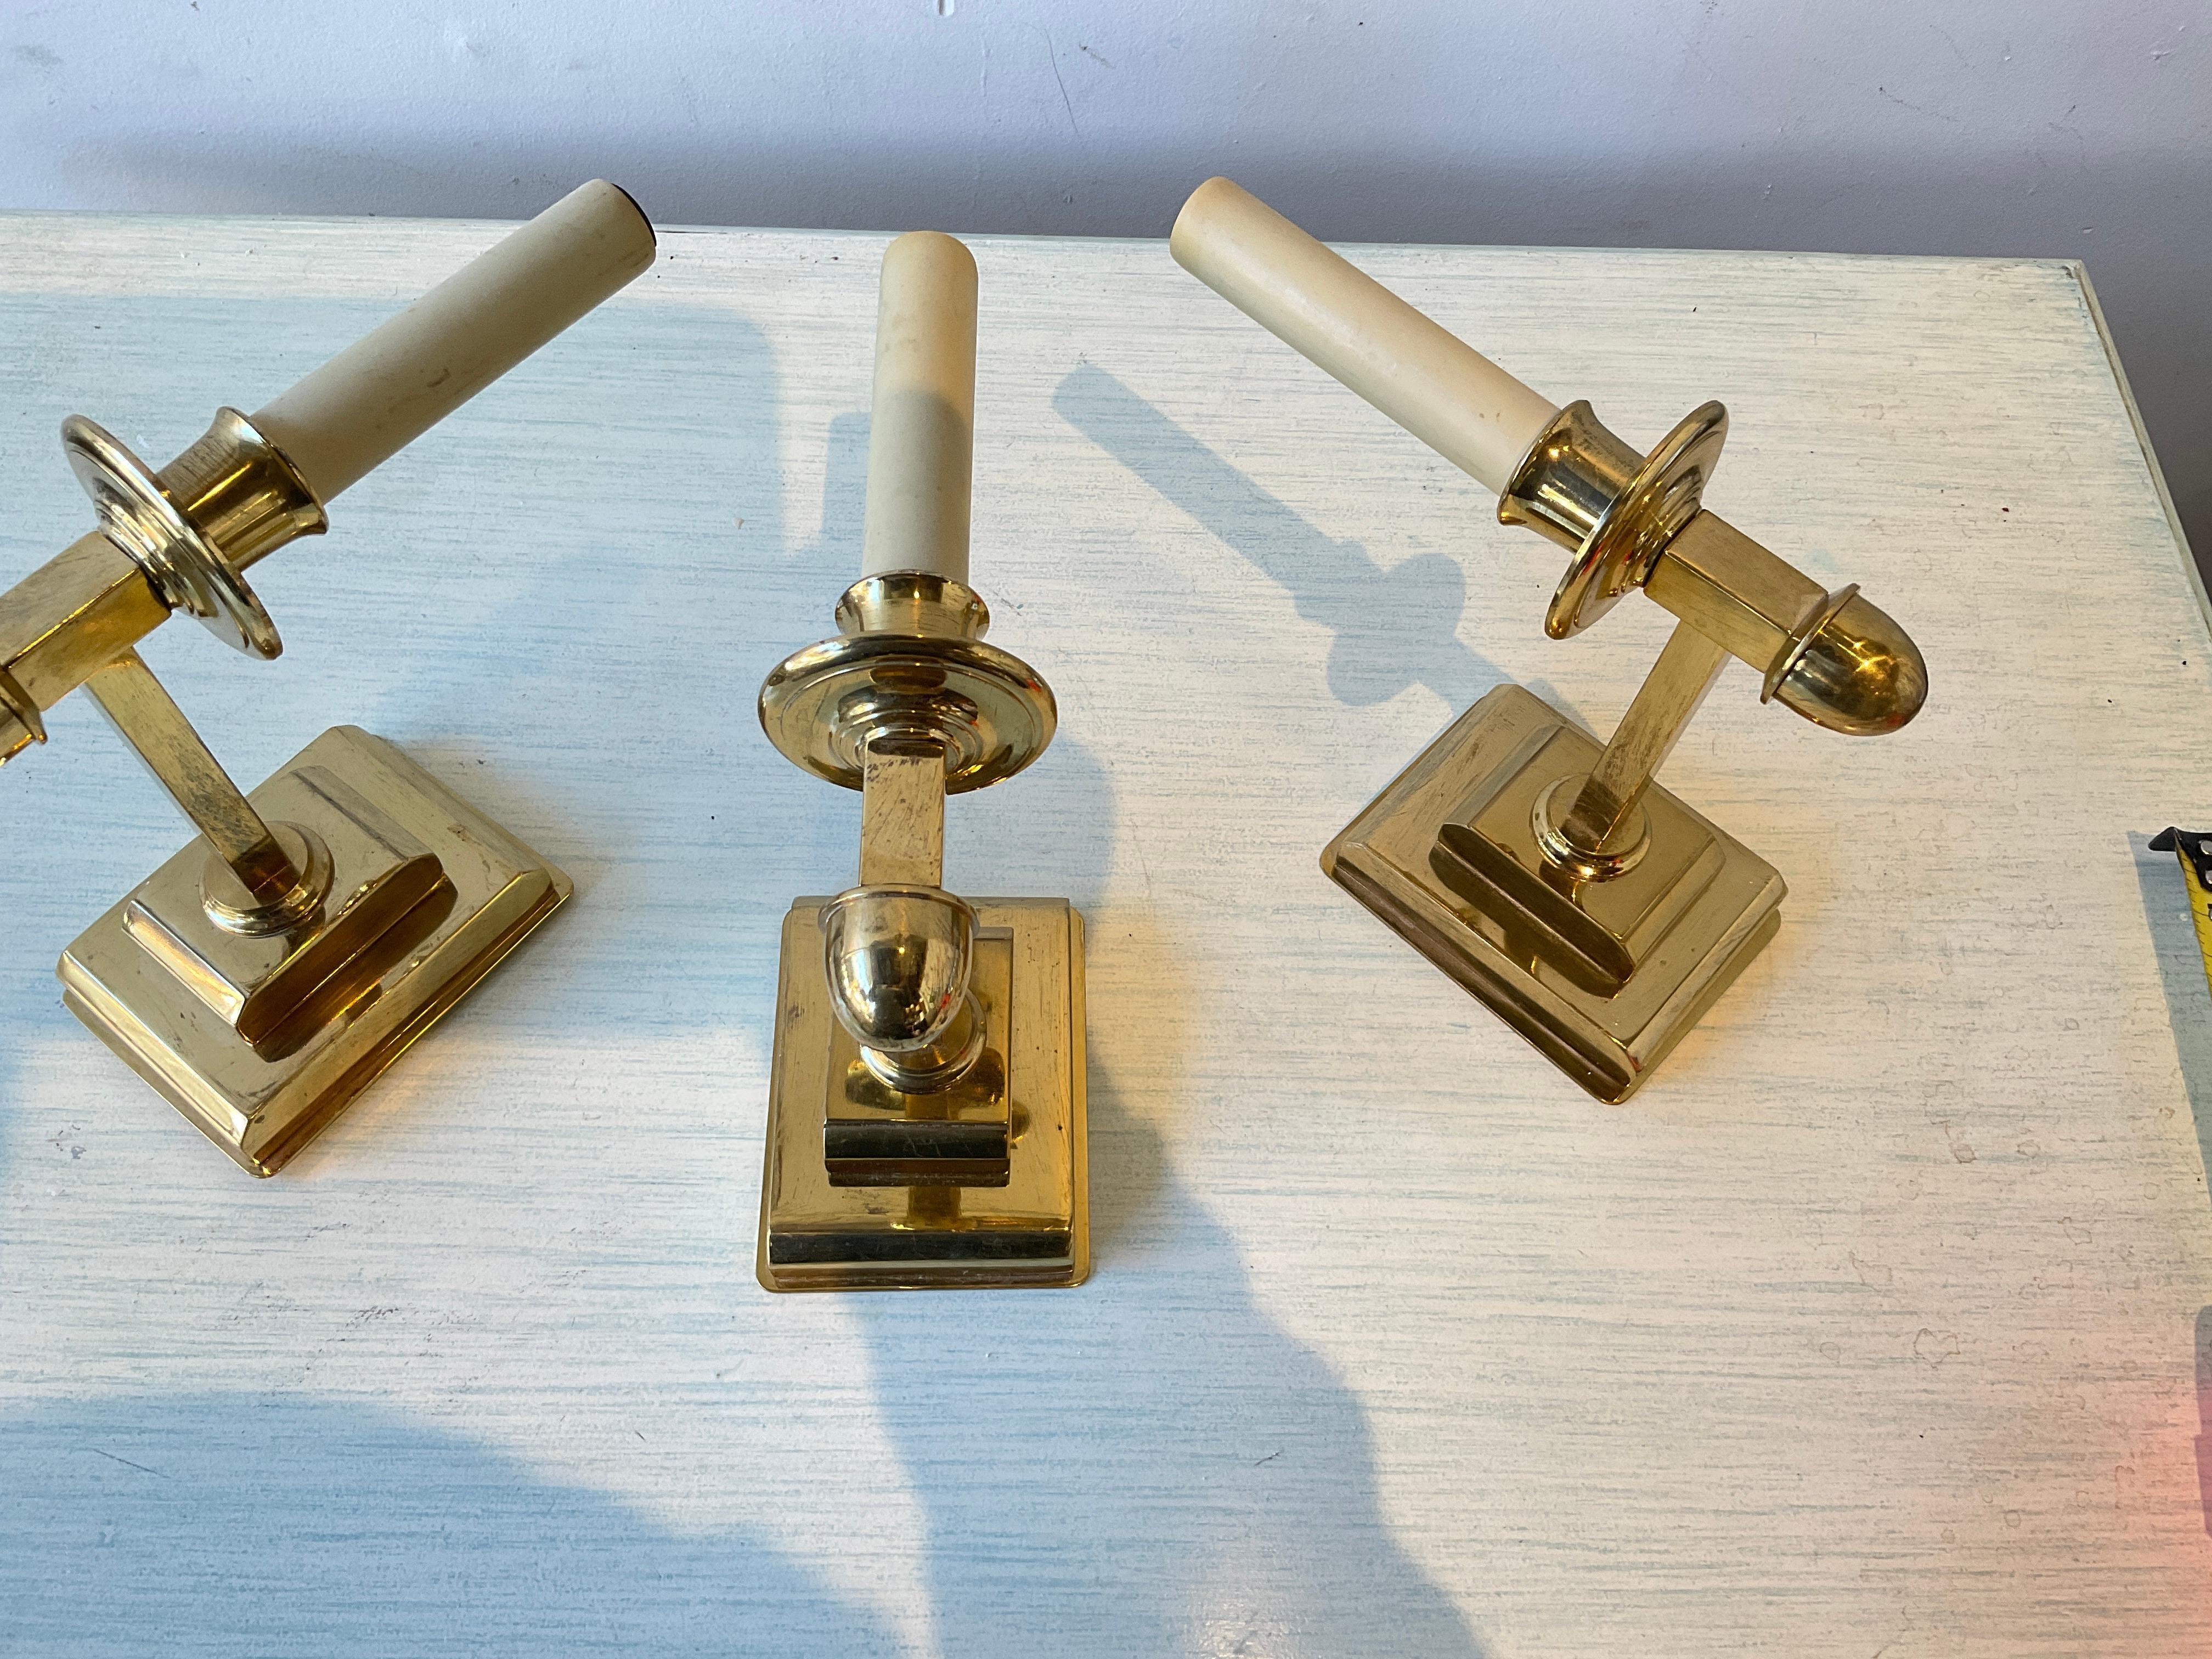 3 solid brass small sconces. Has original wiring, needs rewiring.
Price is 200 per sconce.